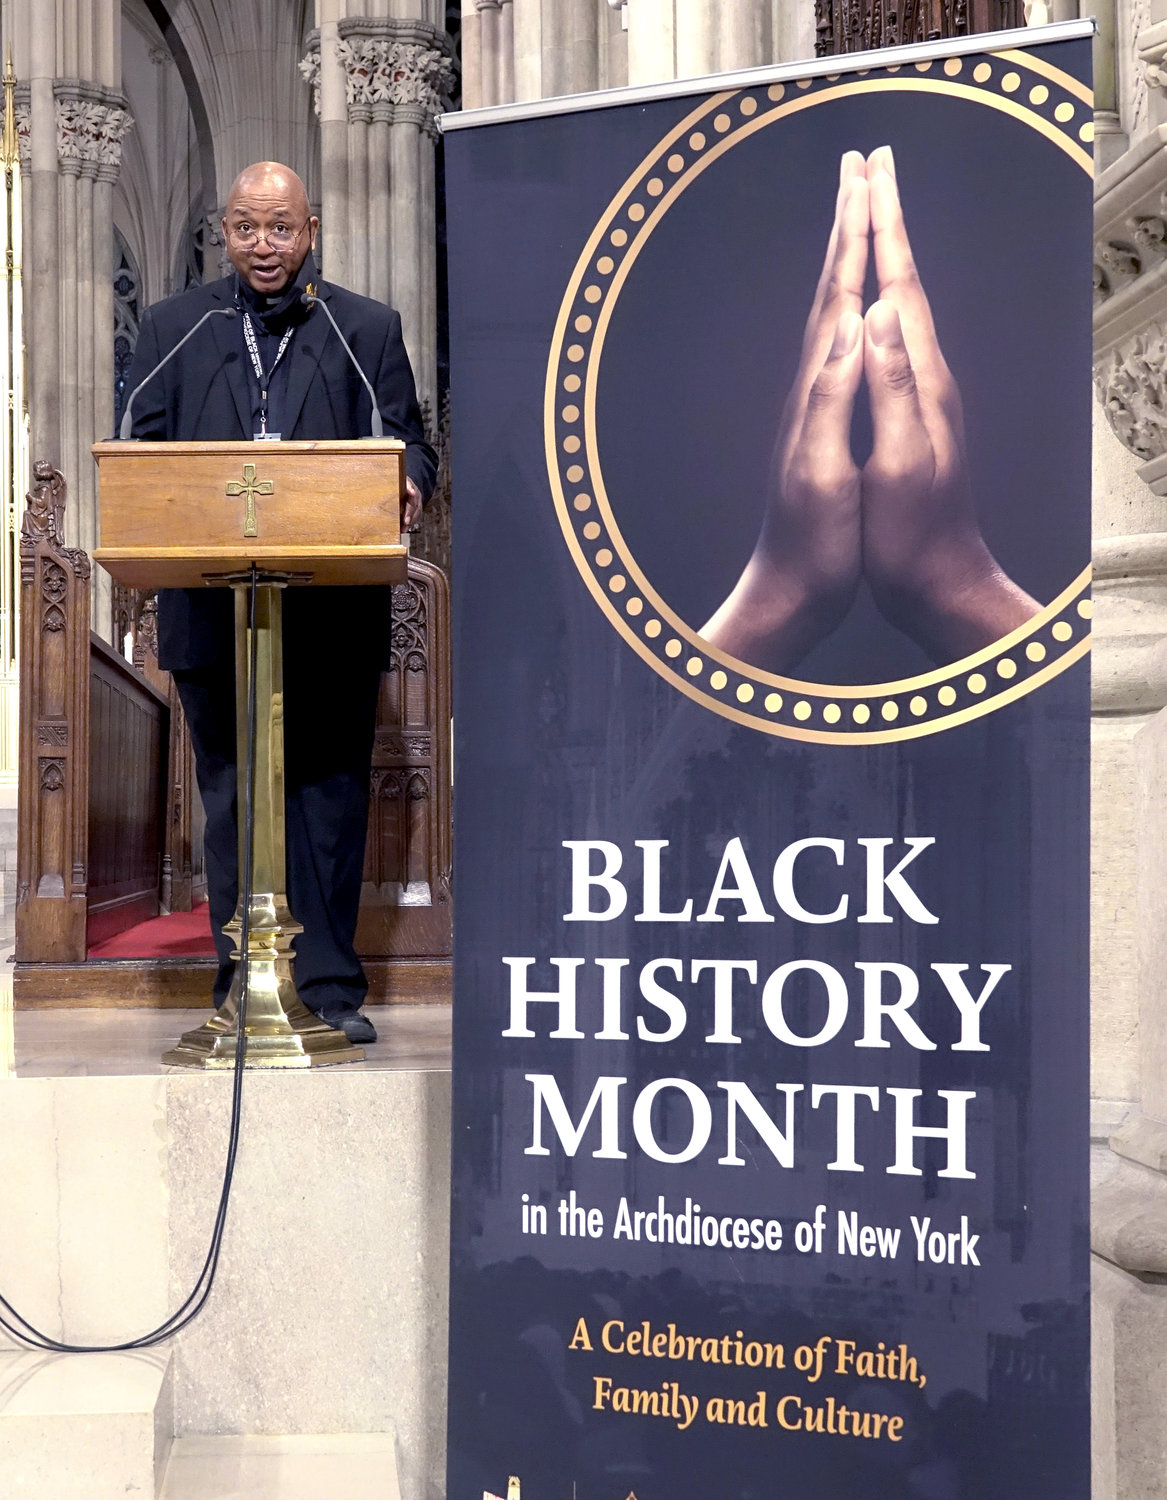 Brother Tyrone A. Davis, C.F.C., executive director of the archdiocesan Office of Black Ministry, speaks Feb. 7 during the annual Black History Month Mass at St. Patrick’s Cathedral. About 275 people attended. Because of pandemic restrictions, organizers had encouraged the faithful to join the Mass virtually via livestream through the cathedral website.